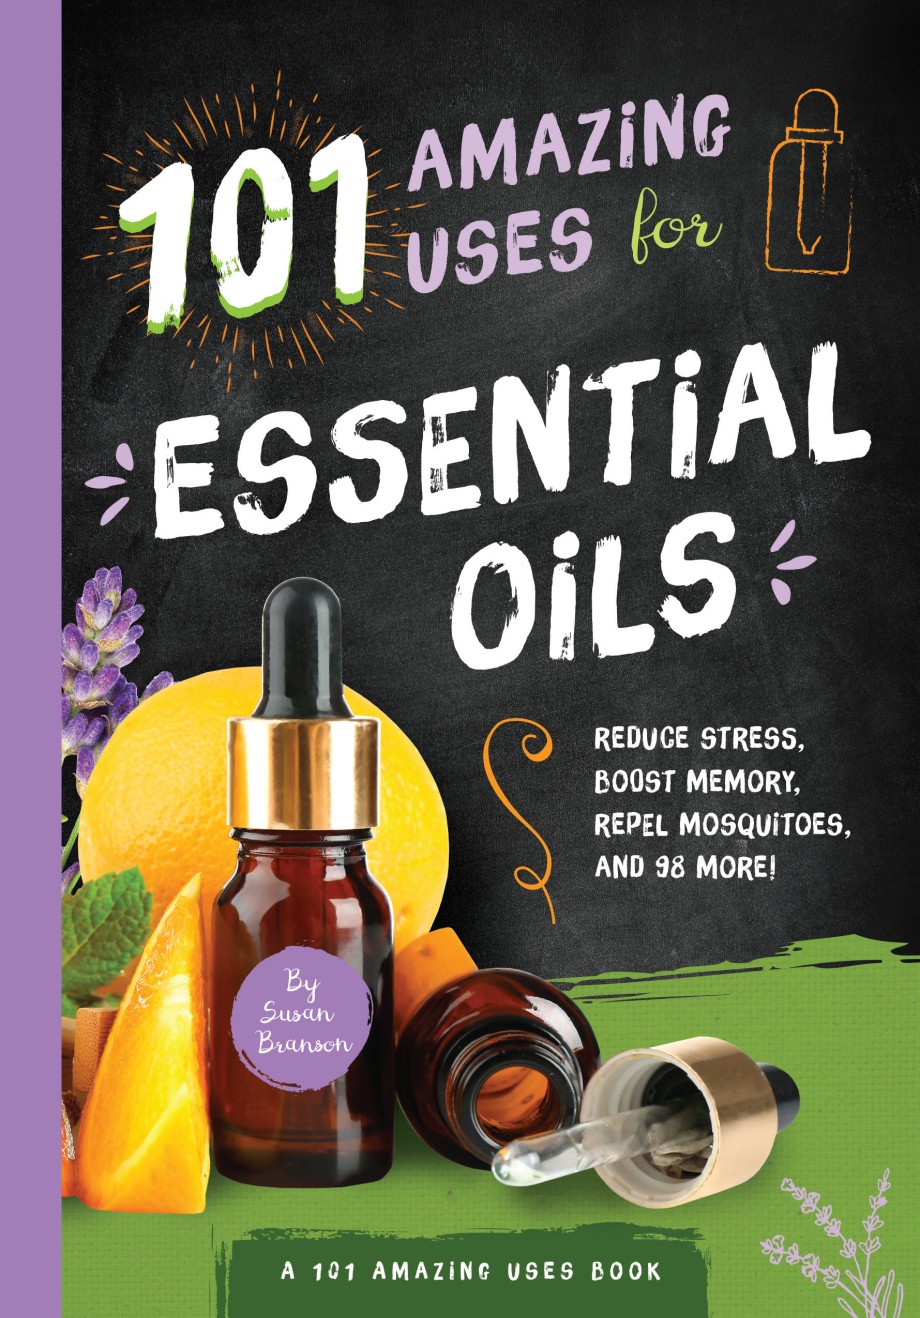 101 Amazing Uses for Essential Oils Reduce Stress, Boost Memory, Repel Mosquitoes and 98 More!